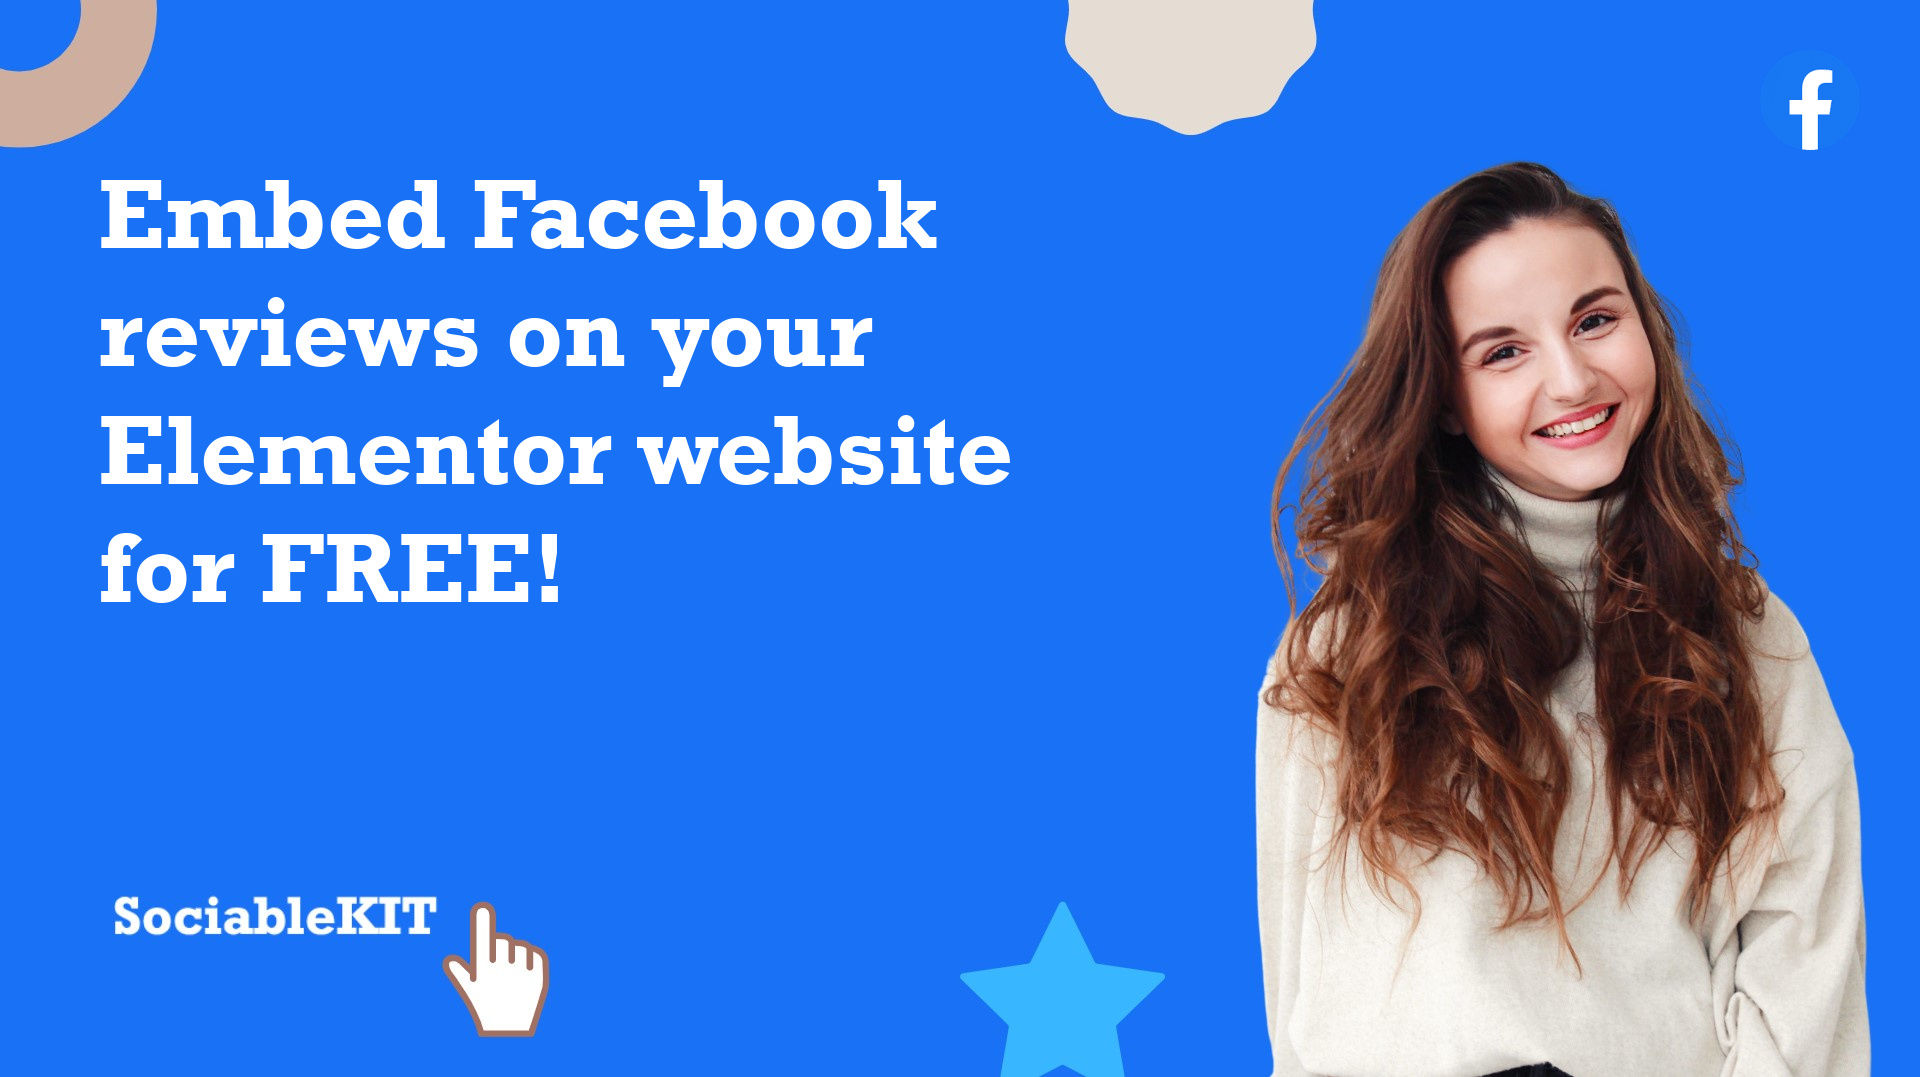 How to embed Facebook reviews on your Elementor website for FREE?